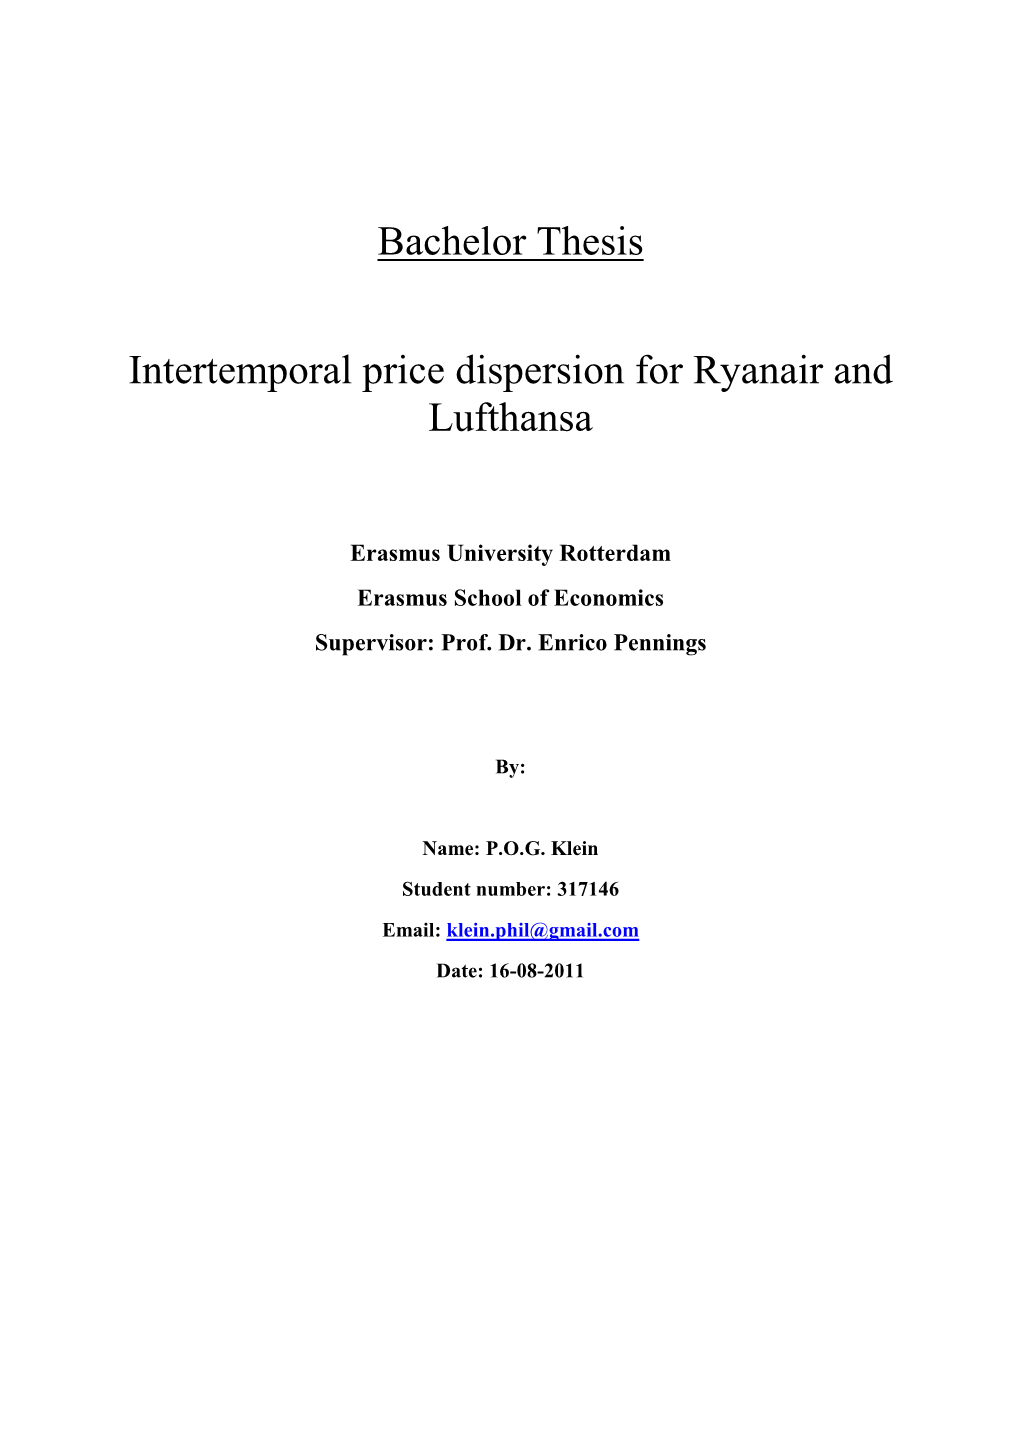 Bachelor Thesis Intertemporal Price Dispersion for Ryanair and Lufthansa